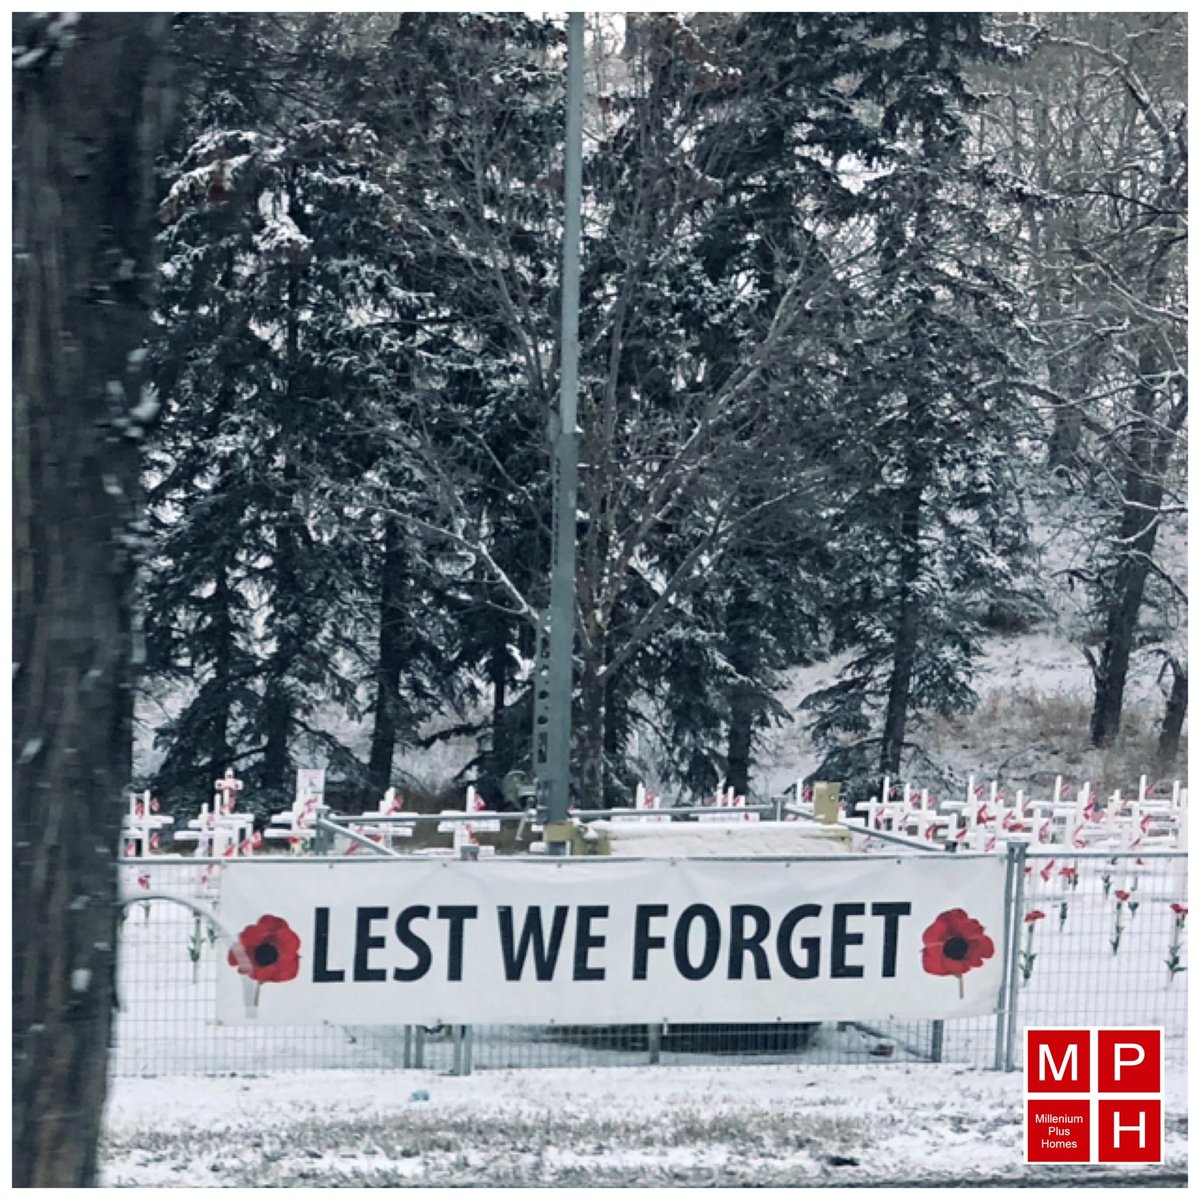 Thank you...

#mphomes #yyc #mphomesliving #calgary #thankyou #leastweforget #remember #remembraceday #fallensoldiers #poppy #multifamilybuilderoftheyear #yycliving  #veteransday #memorial #thankyouforyourservice #ww #military #memorialdrive #yycbuilder